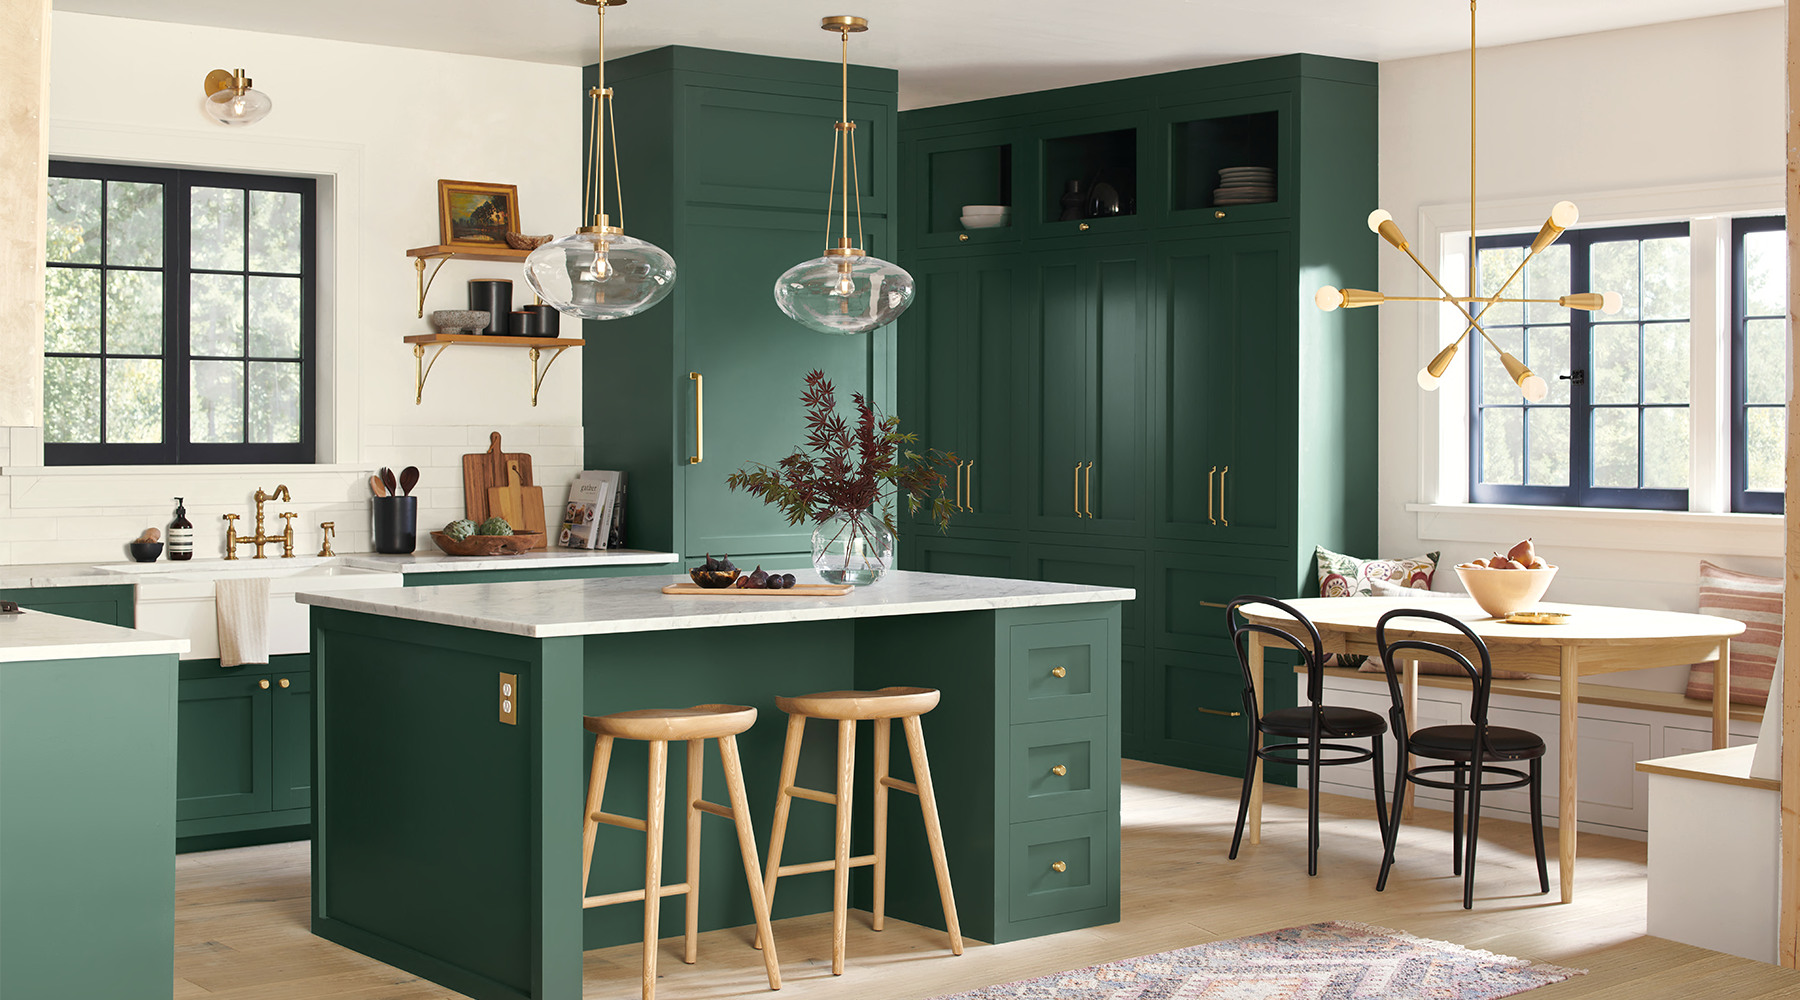 Revitalise Your Kitchen on a Budget by Painting Cabinets